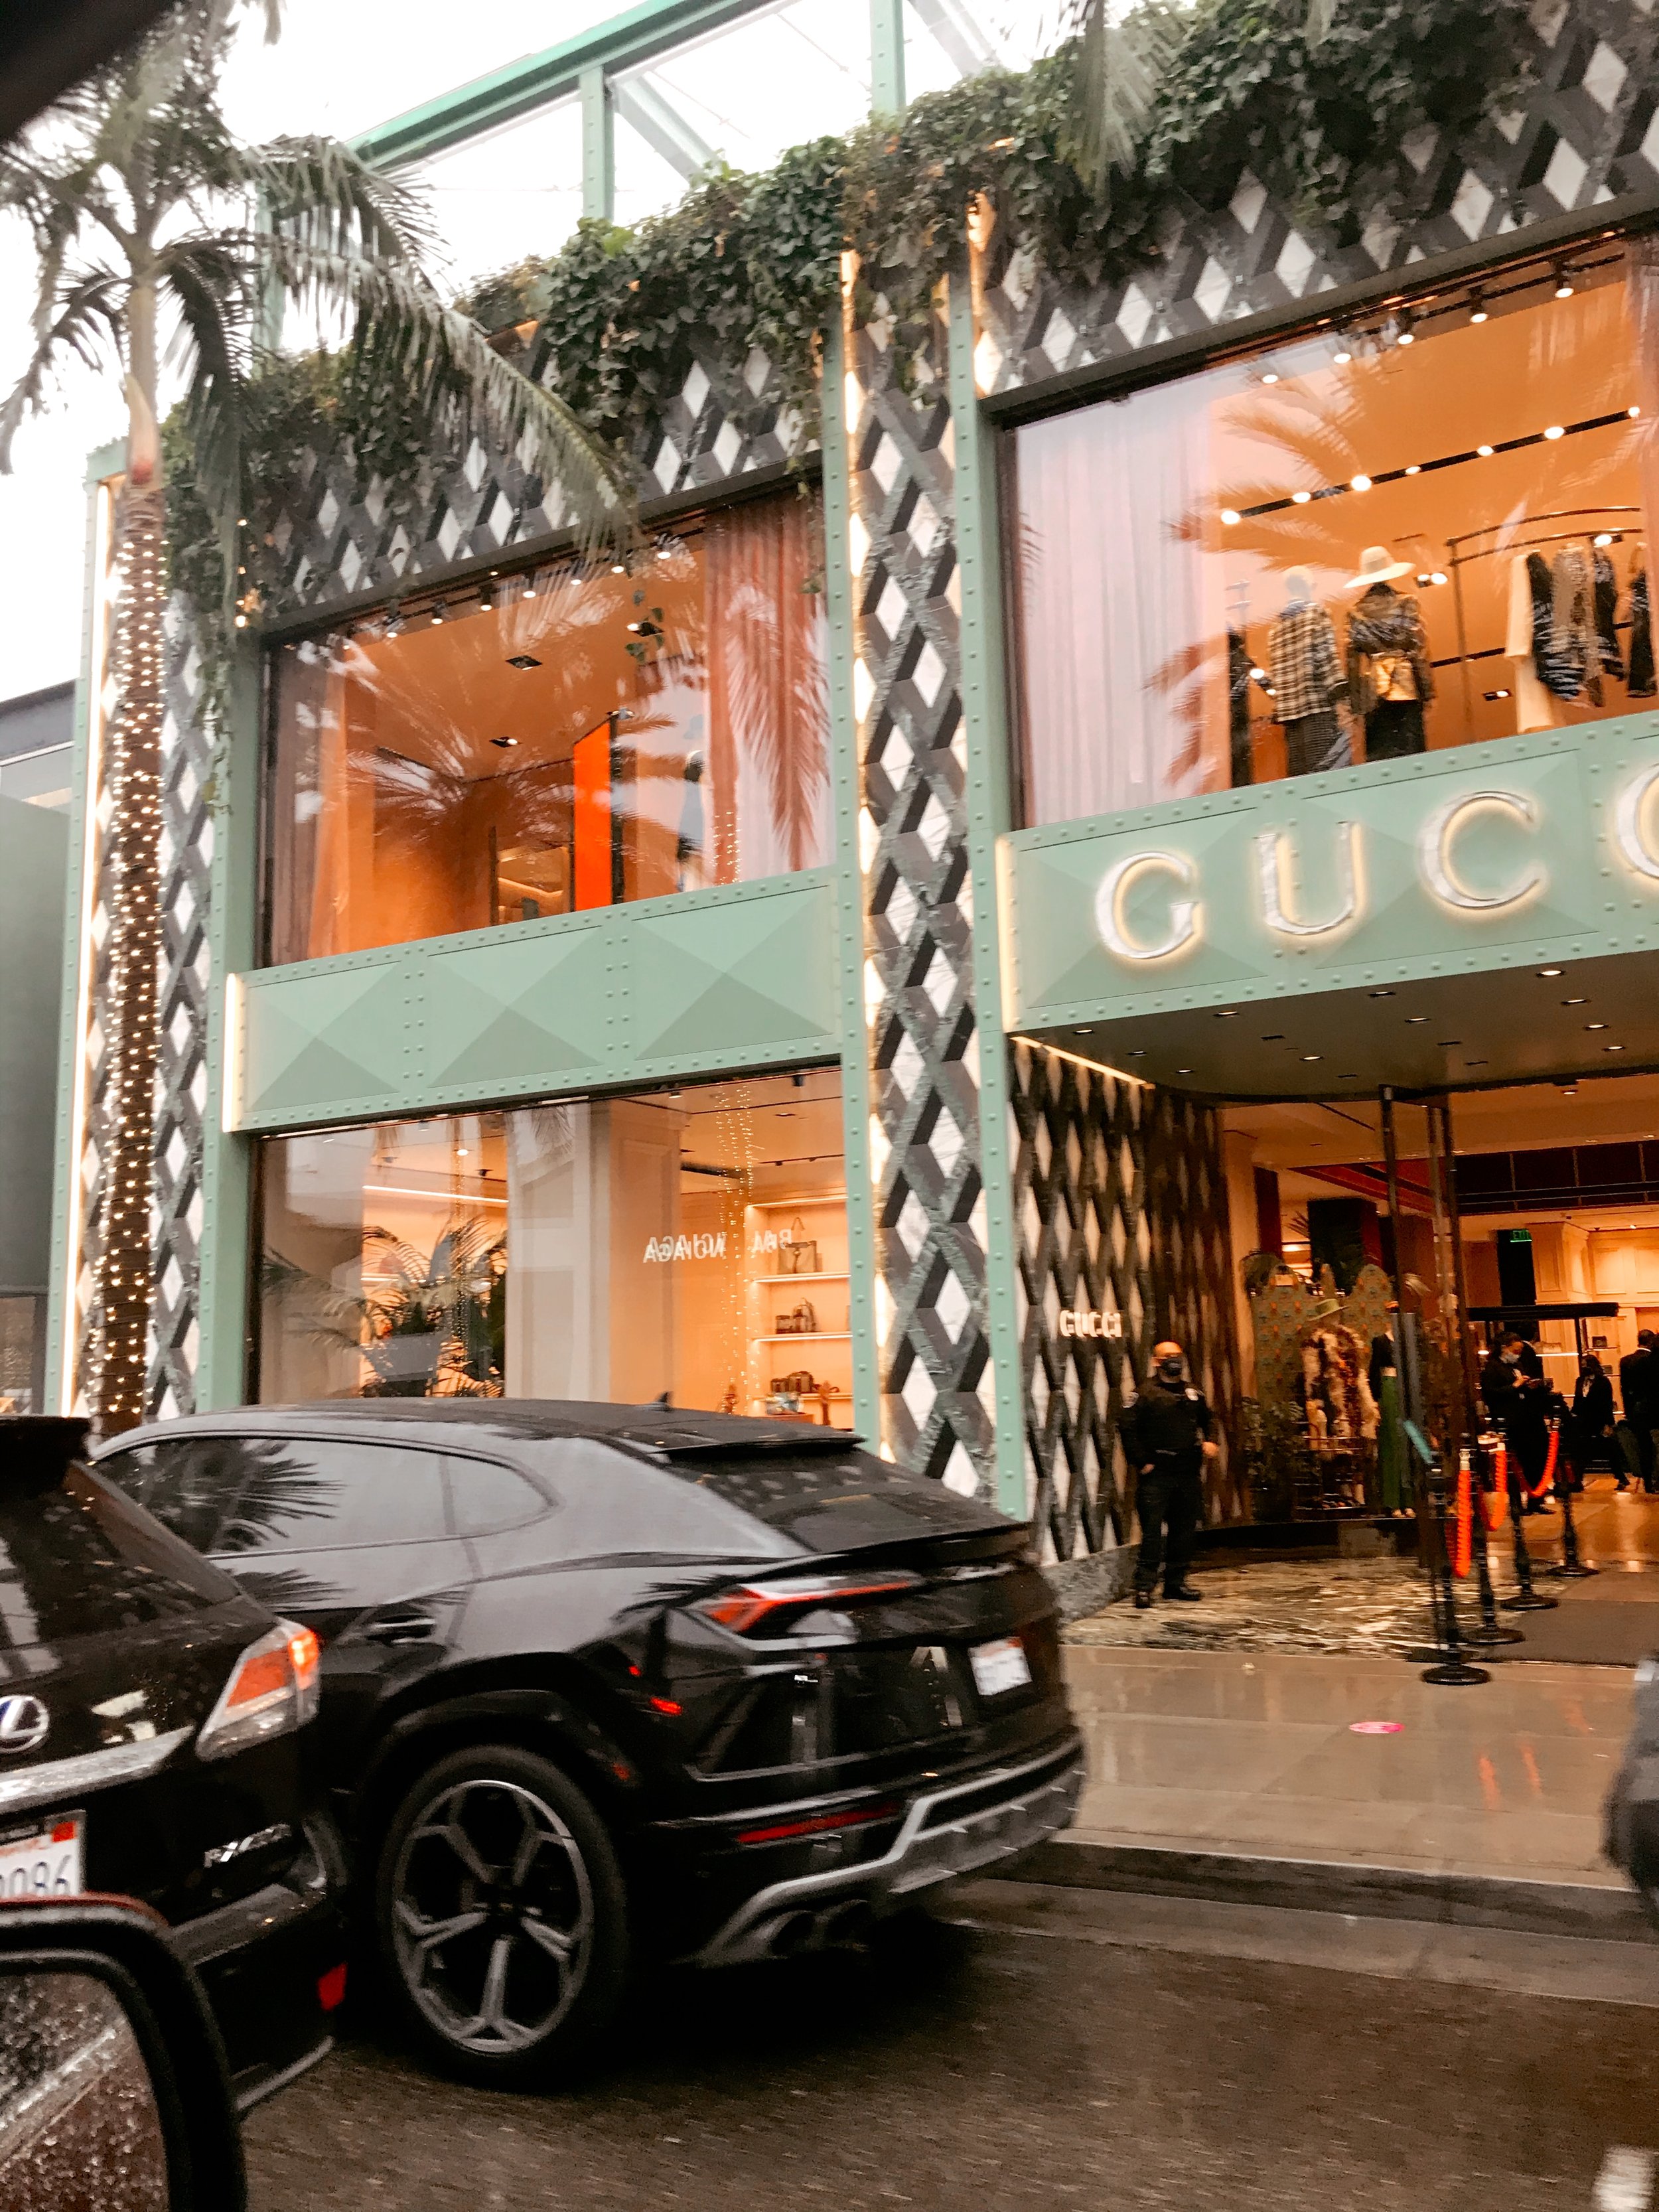 A taste of luxury: Chew Gucci, sip Louis Vuitton, and bite into